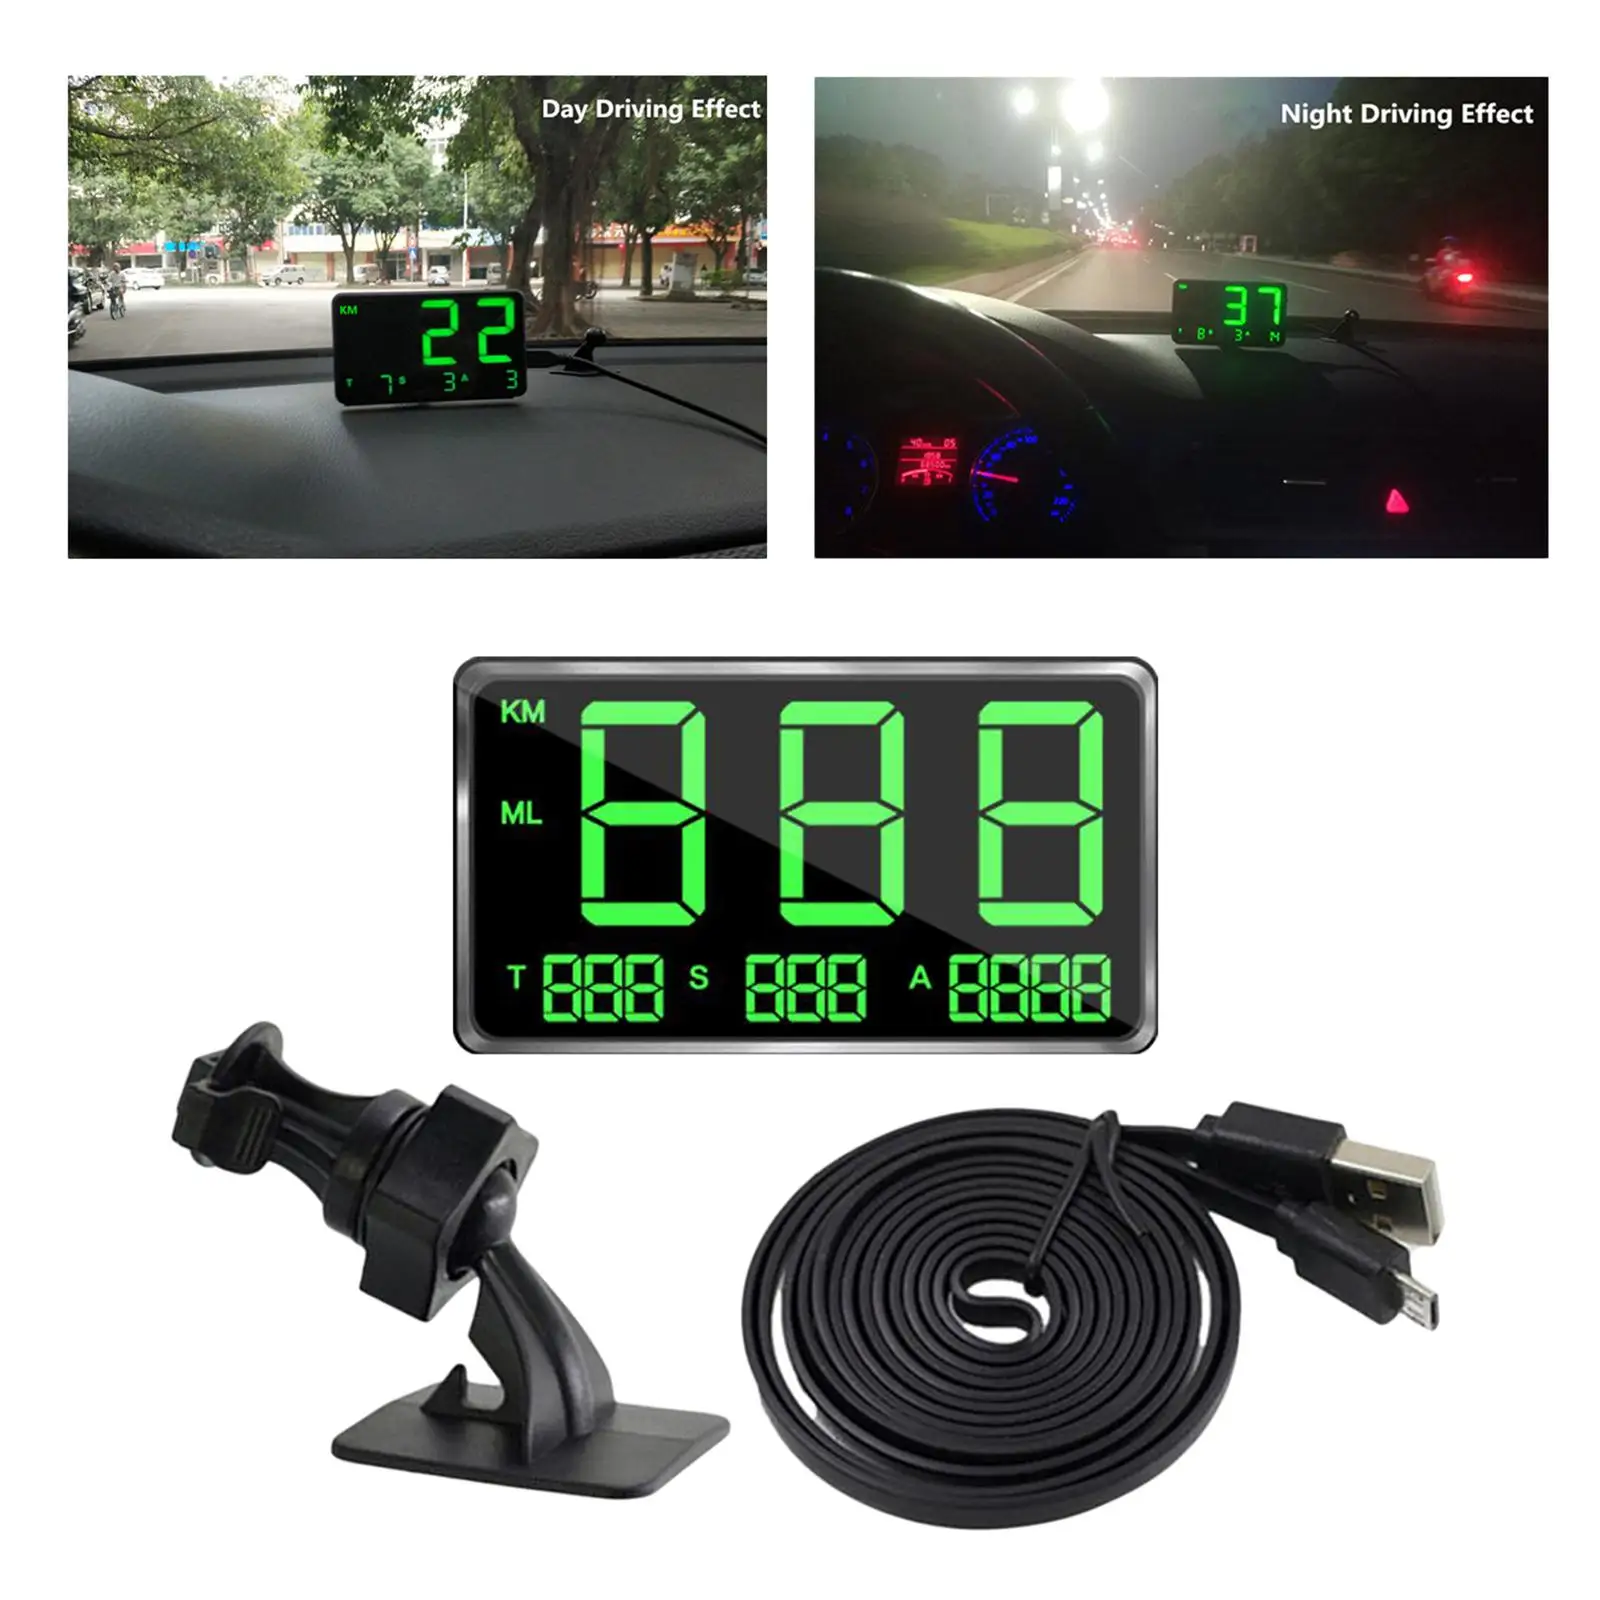 Car GPS Speedometer Overspeed Warning LED Display HUD Head Up Display for All Cars Truck Motorcycle SUV Green Numbers